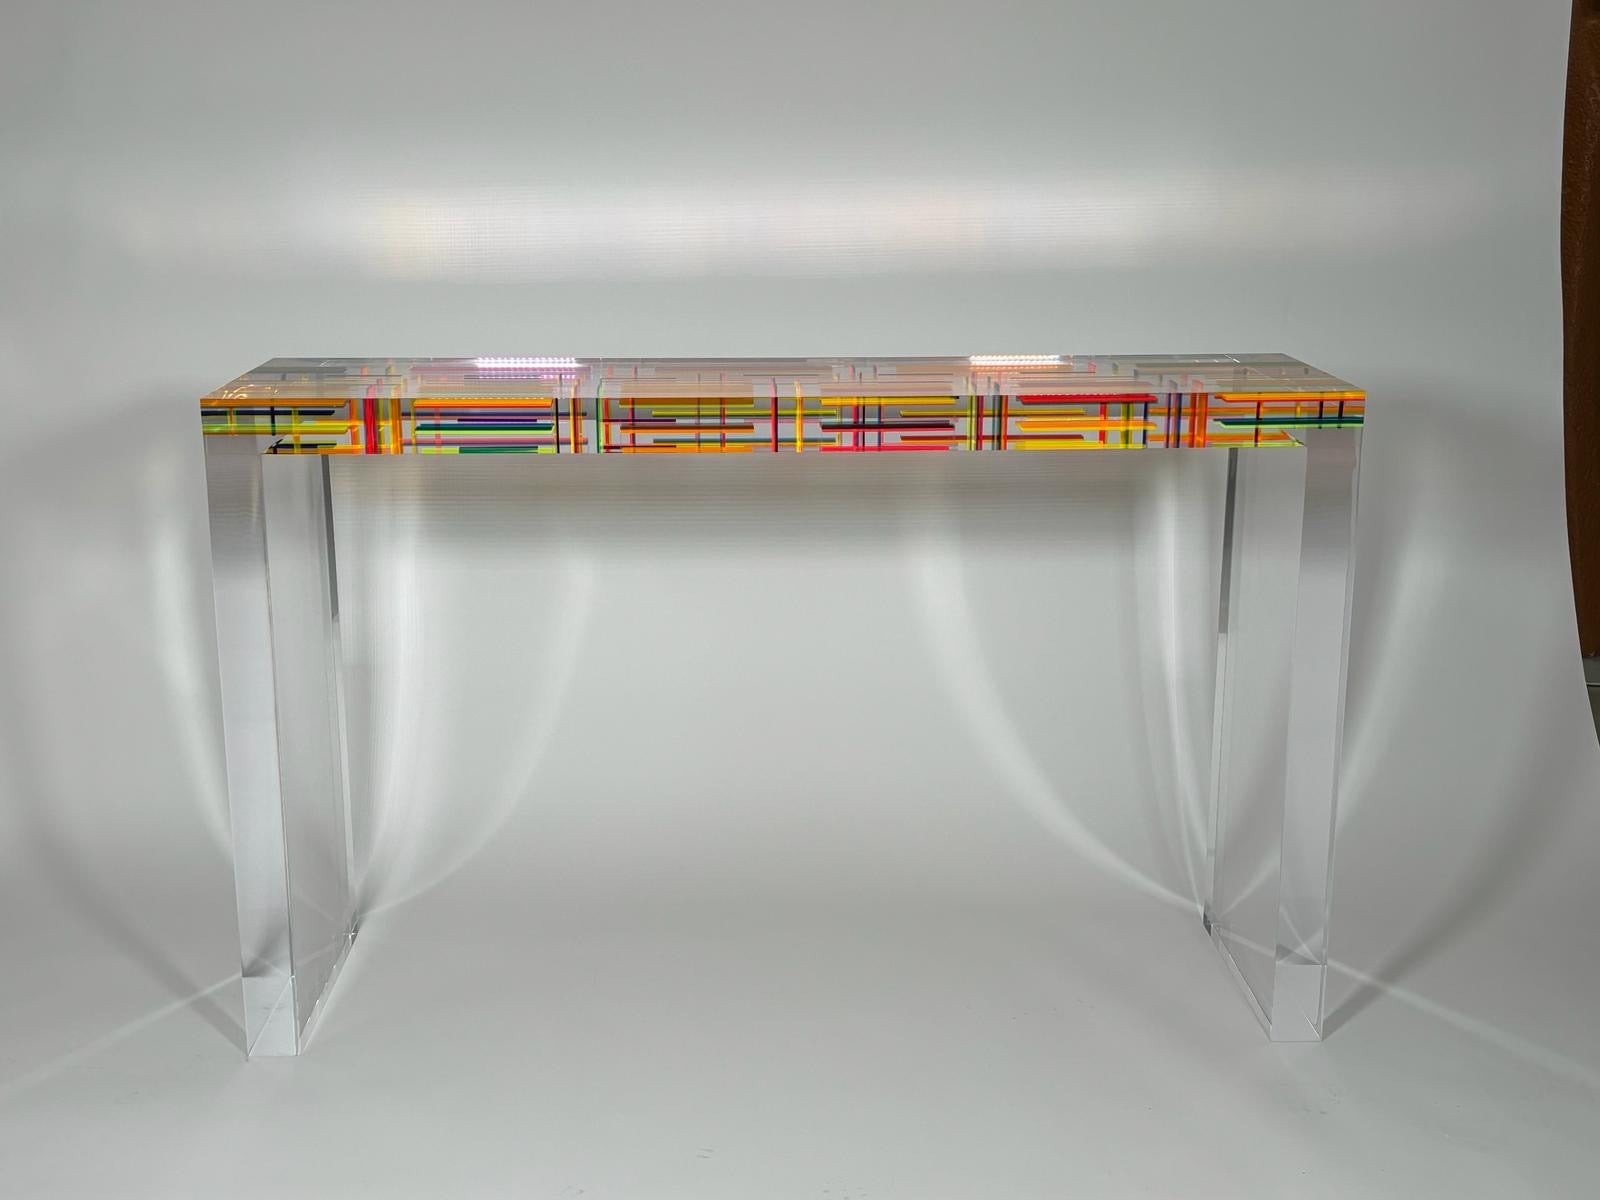 Console DNA model with small colored Plexiglas rectangles.
A series of unique pieces designed by Studio Superego for Superego Editions.

Biography
Superego editions was born in 2006, performing a constant activity of research in decorative arts by